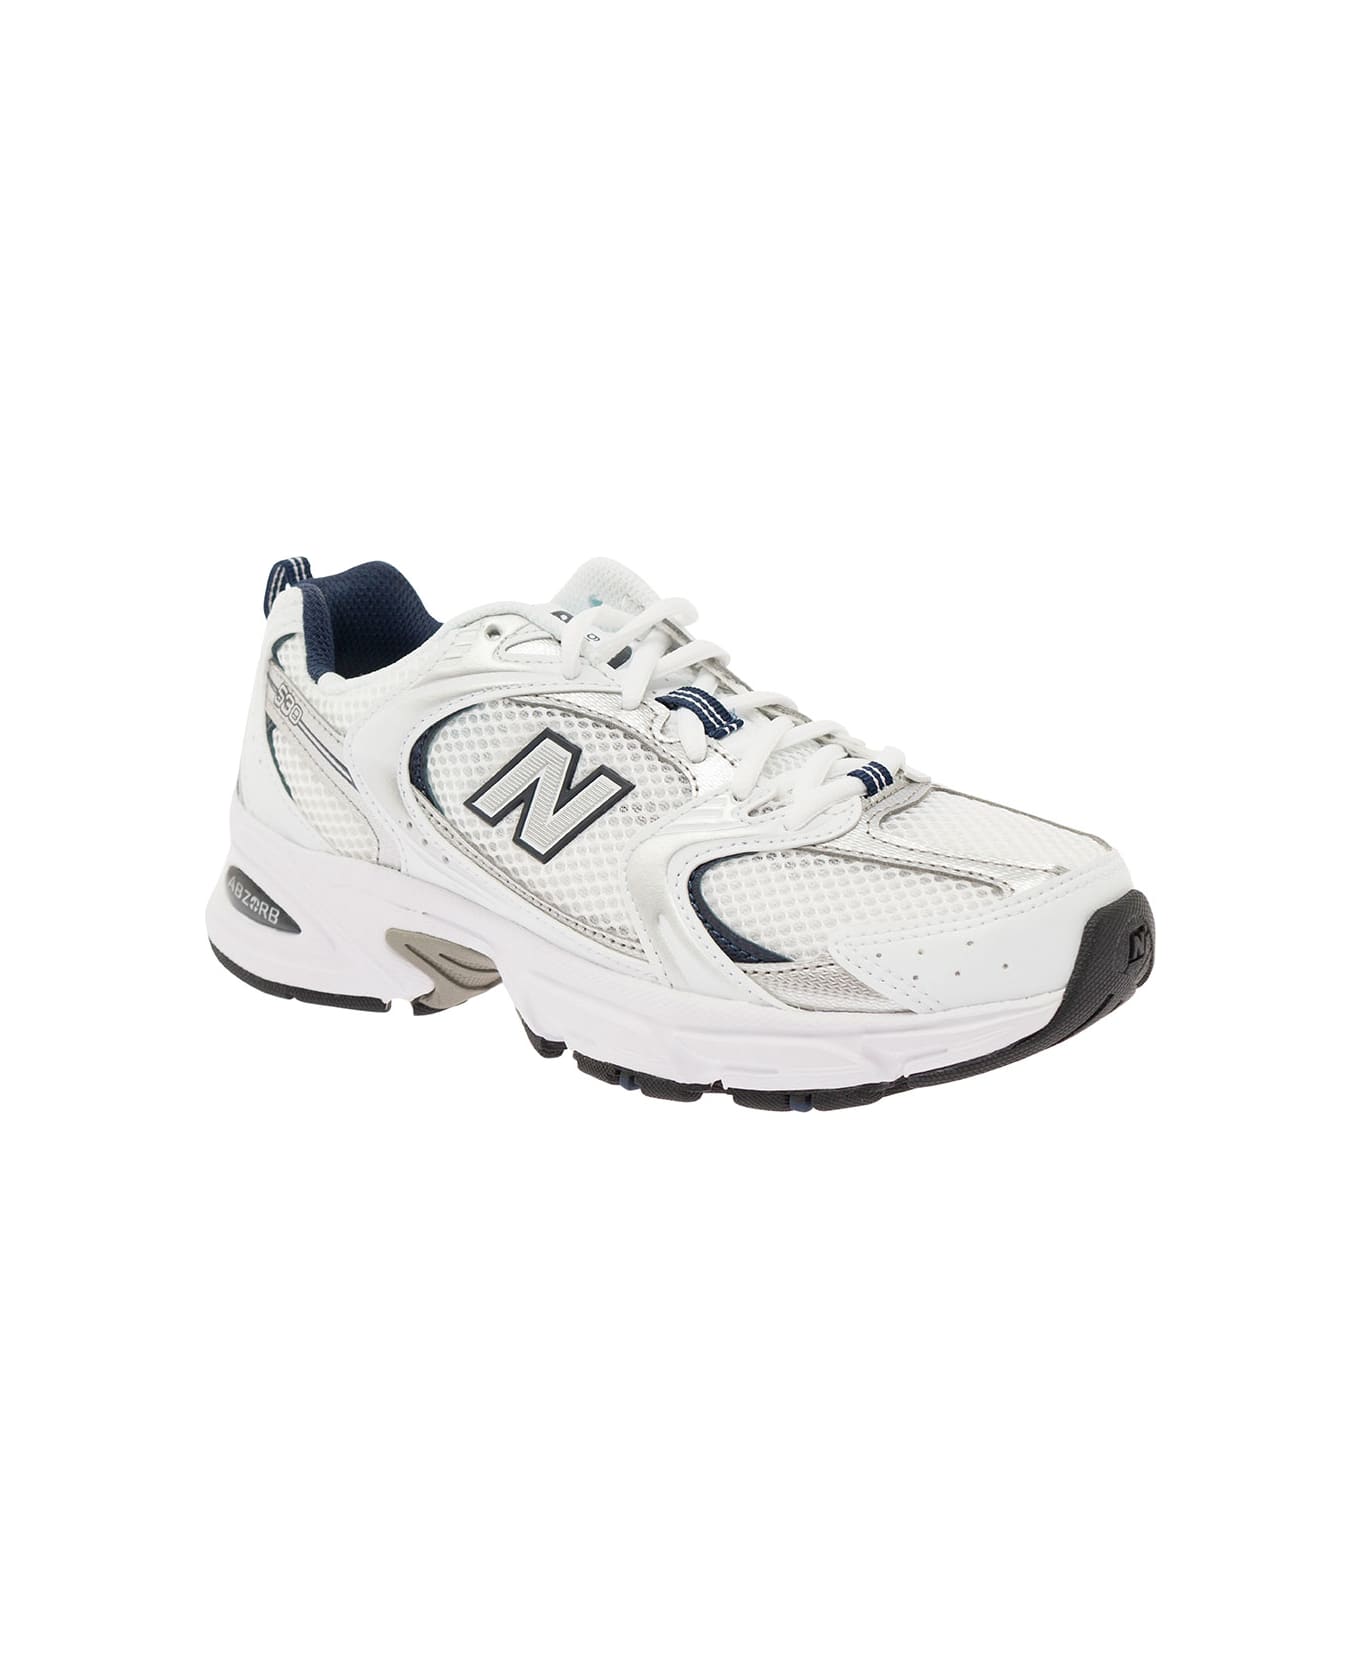 New Balance '530' White And Blue Low Top Sneakers With Logo Patch In Tech Fabric Woman - White